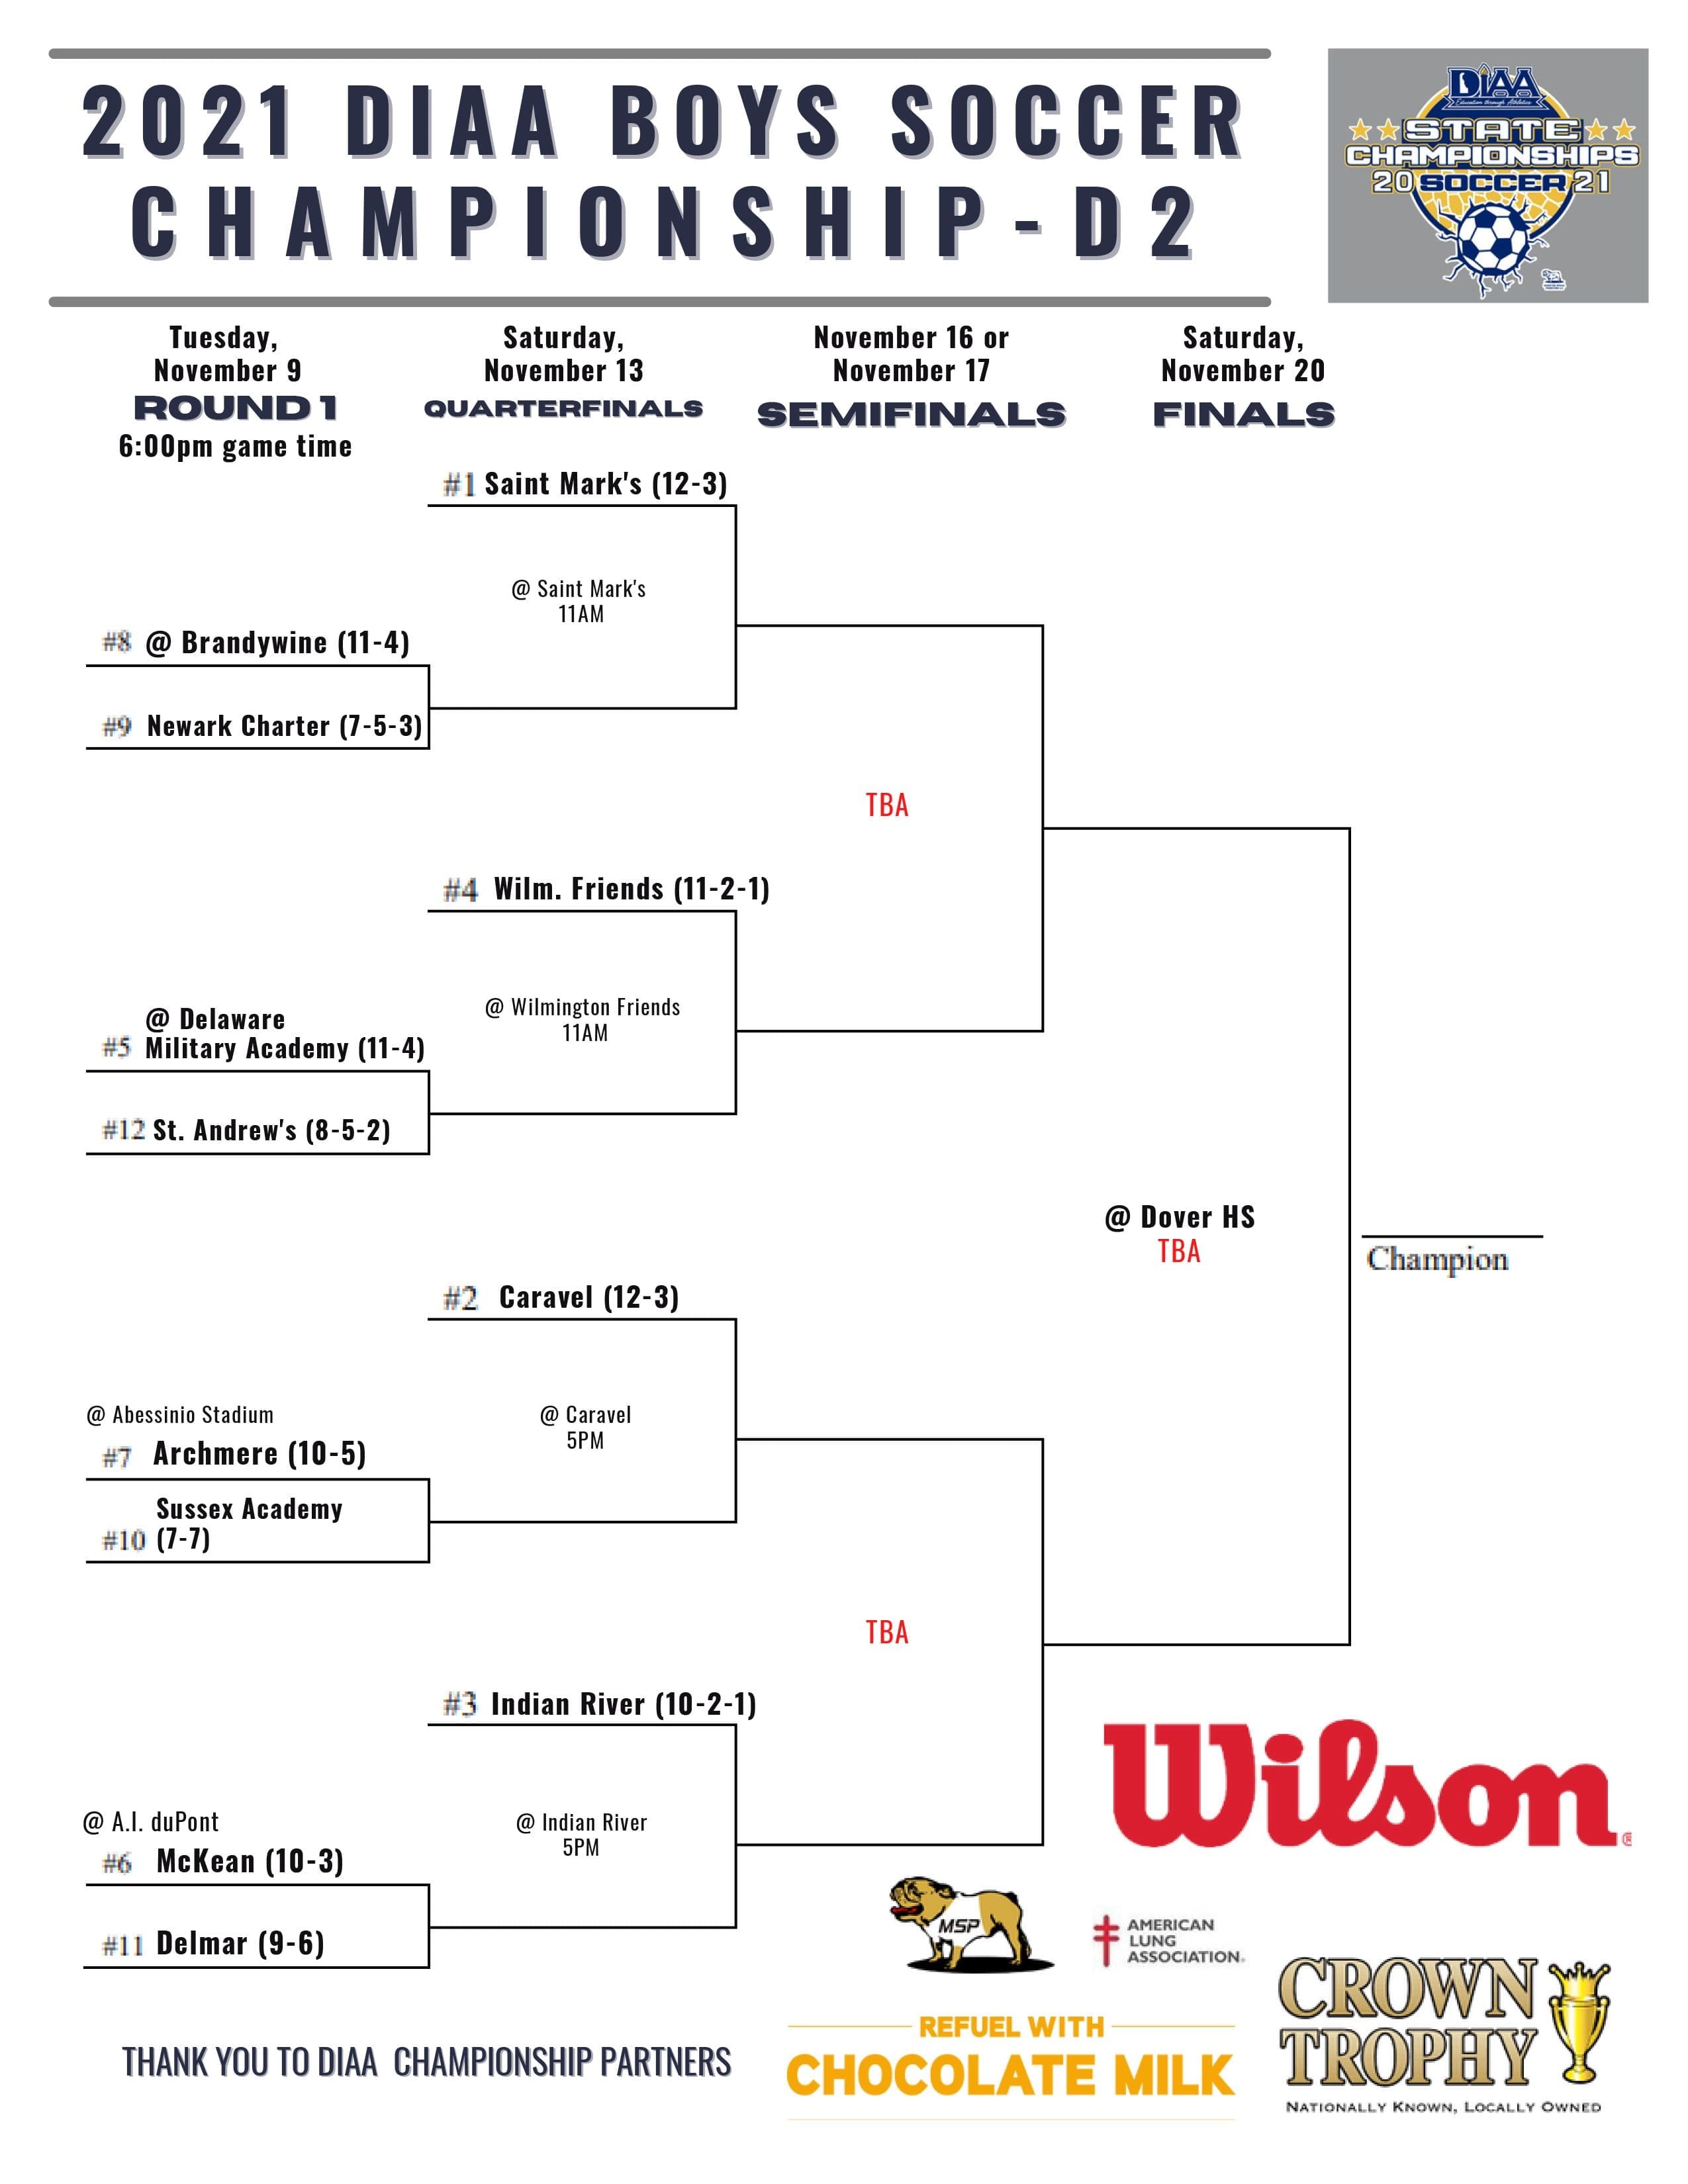 2021 DIAA Boys Soccer State Championship Brackets Town Square